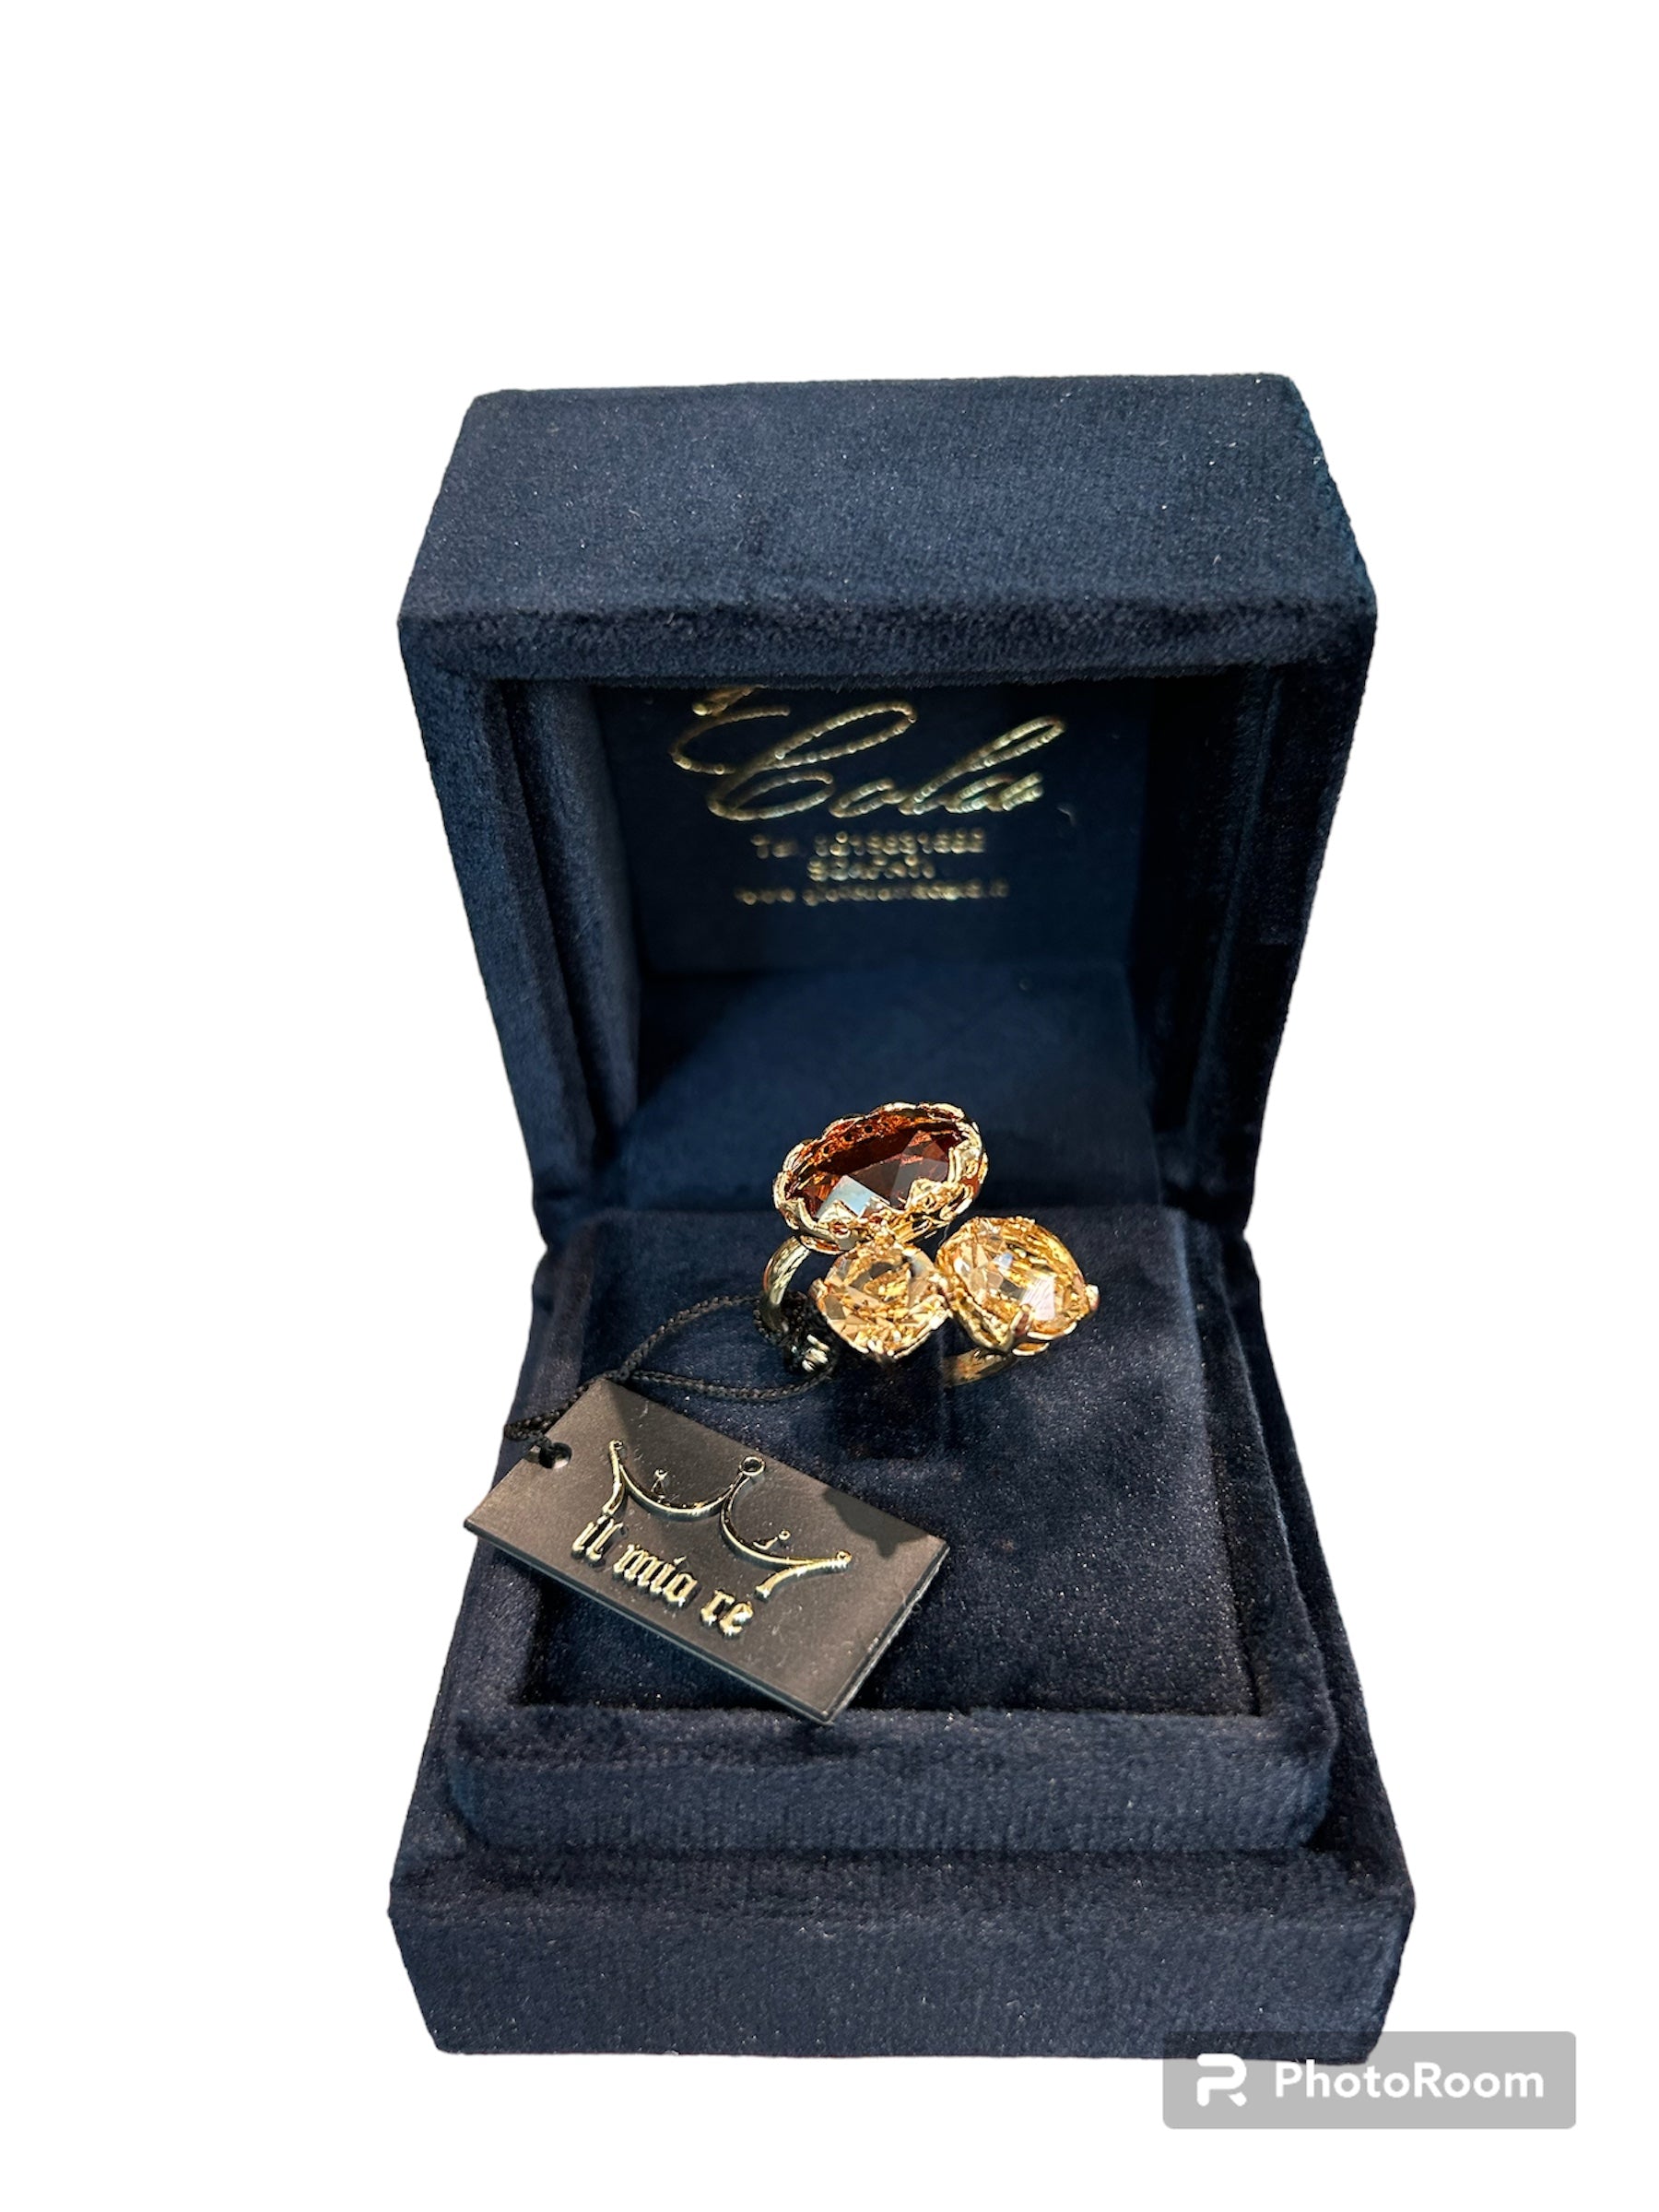 IL Mio Re - Medium ring with smoky stones in gilded bronze - ILMIORE AN 073